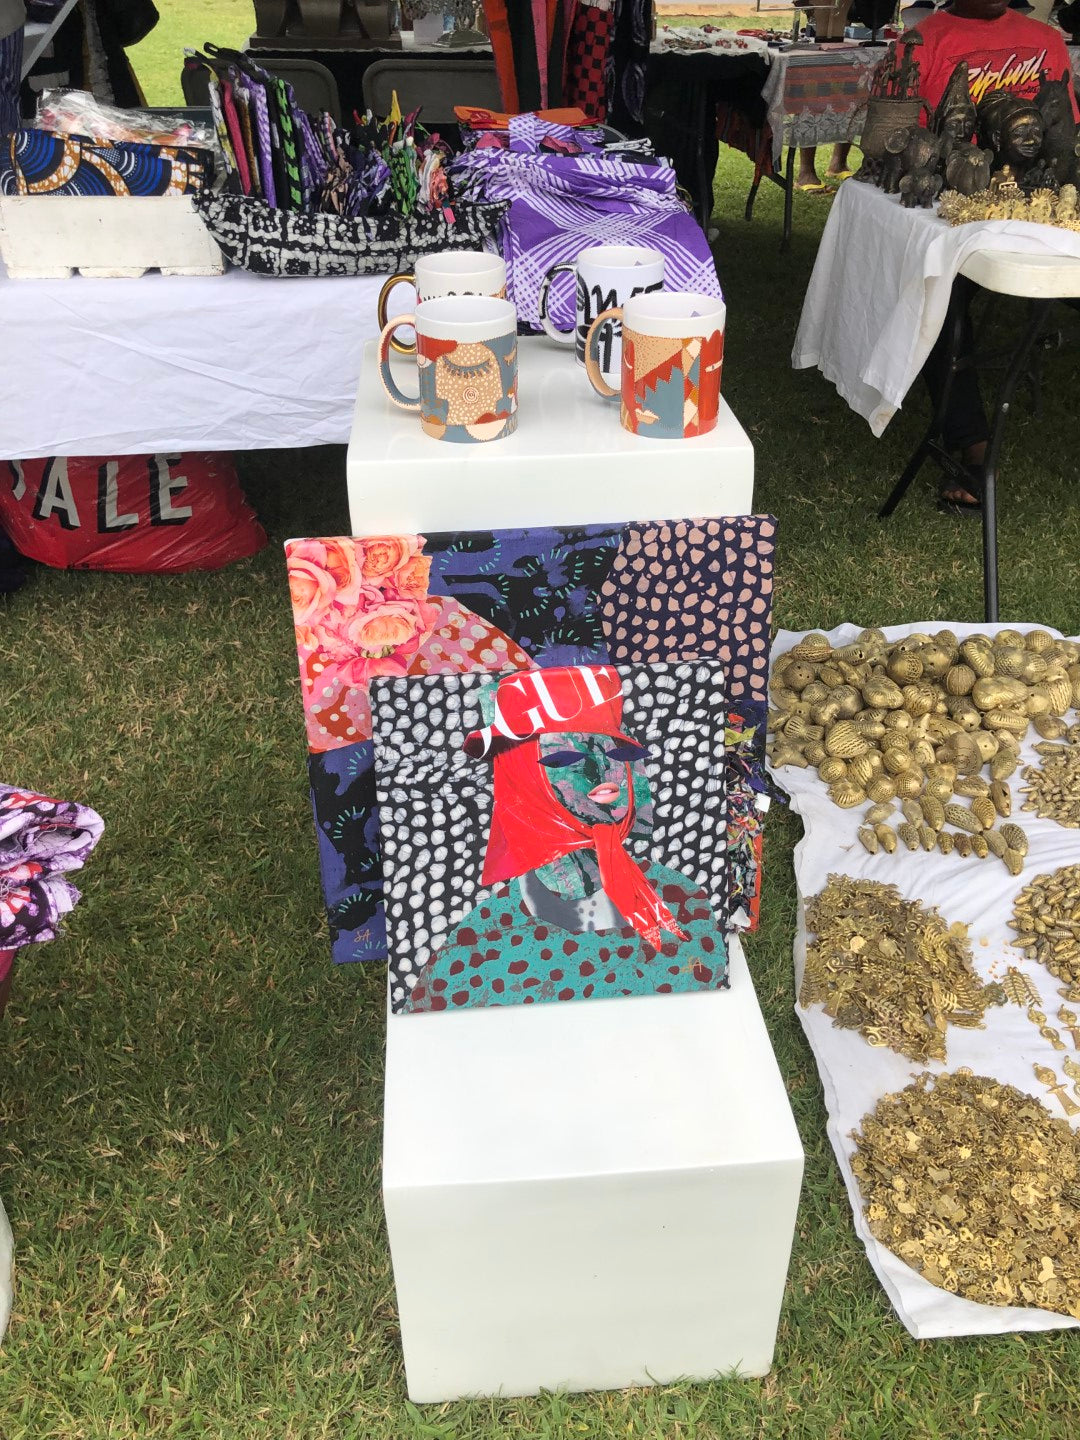 Outdoor market display with African prints, designed mugs, sculptures, and a collage art piece with a stylish woman.